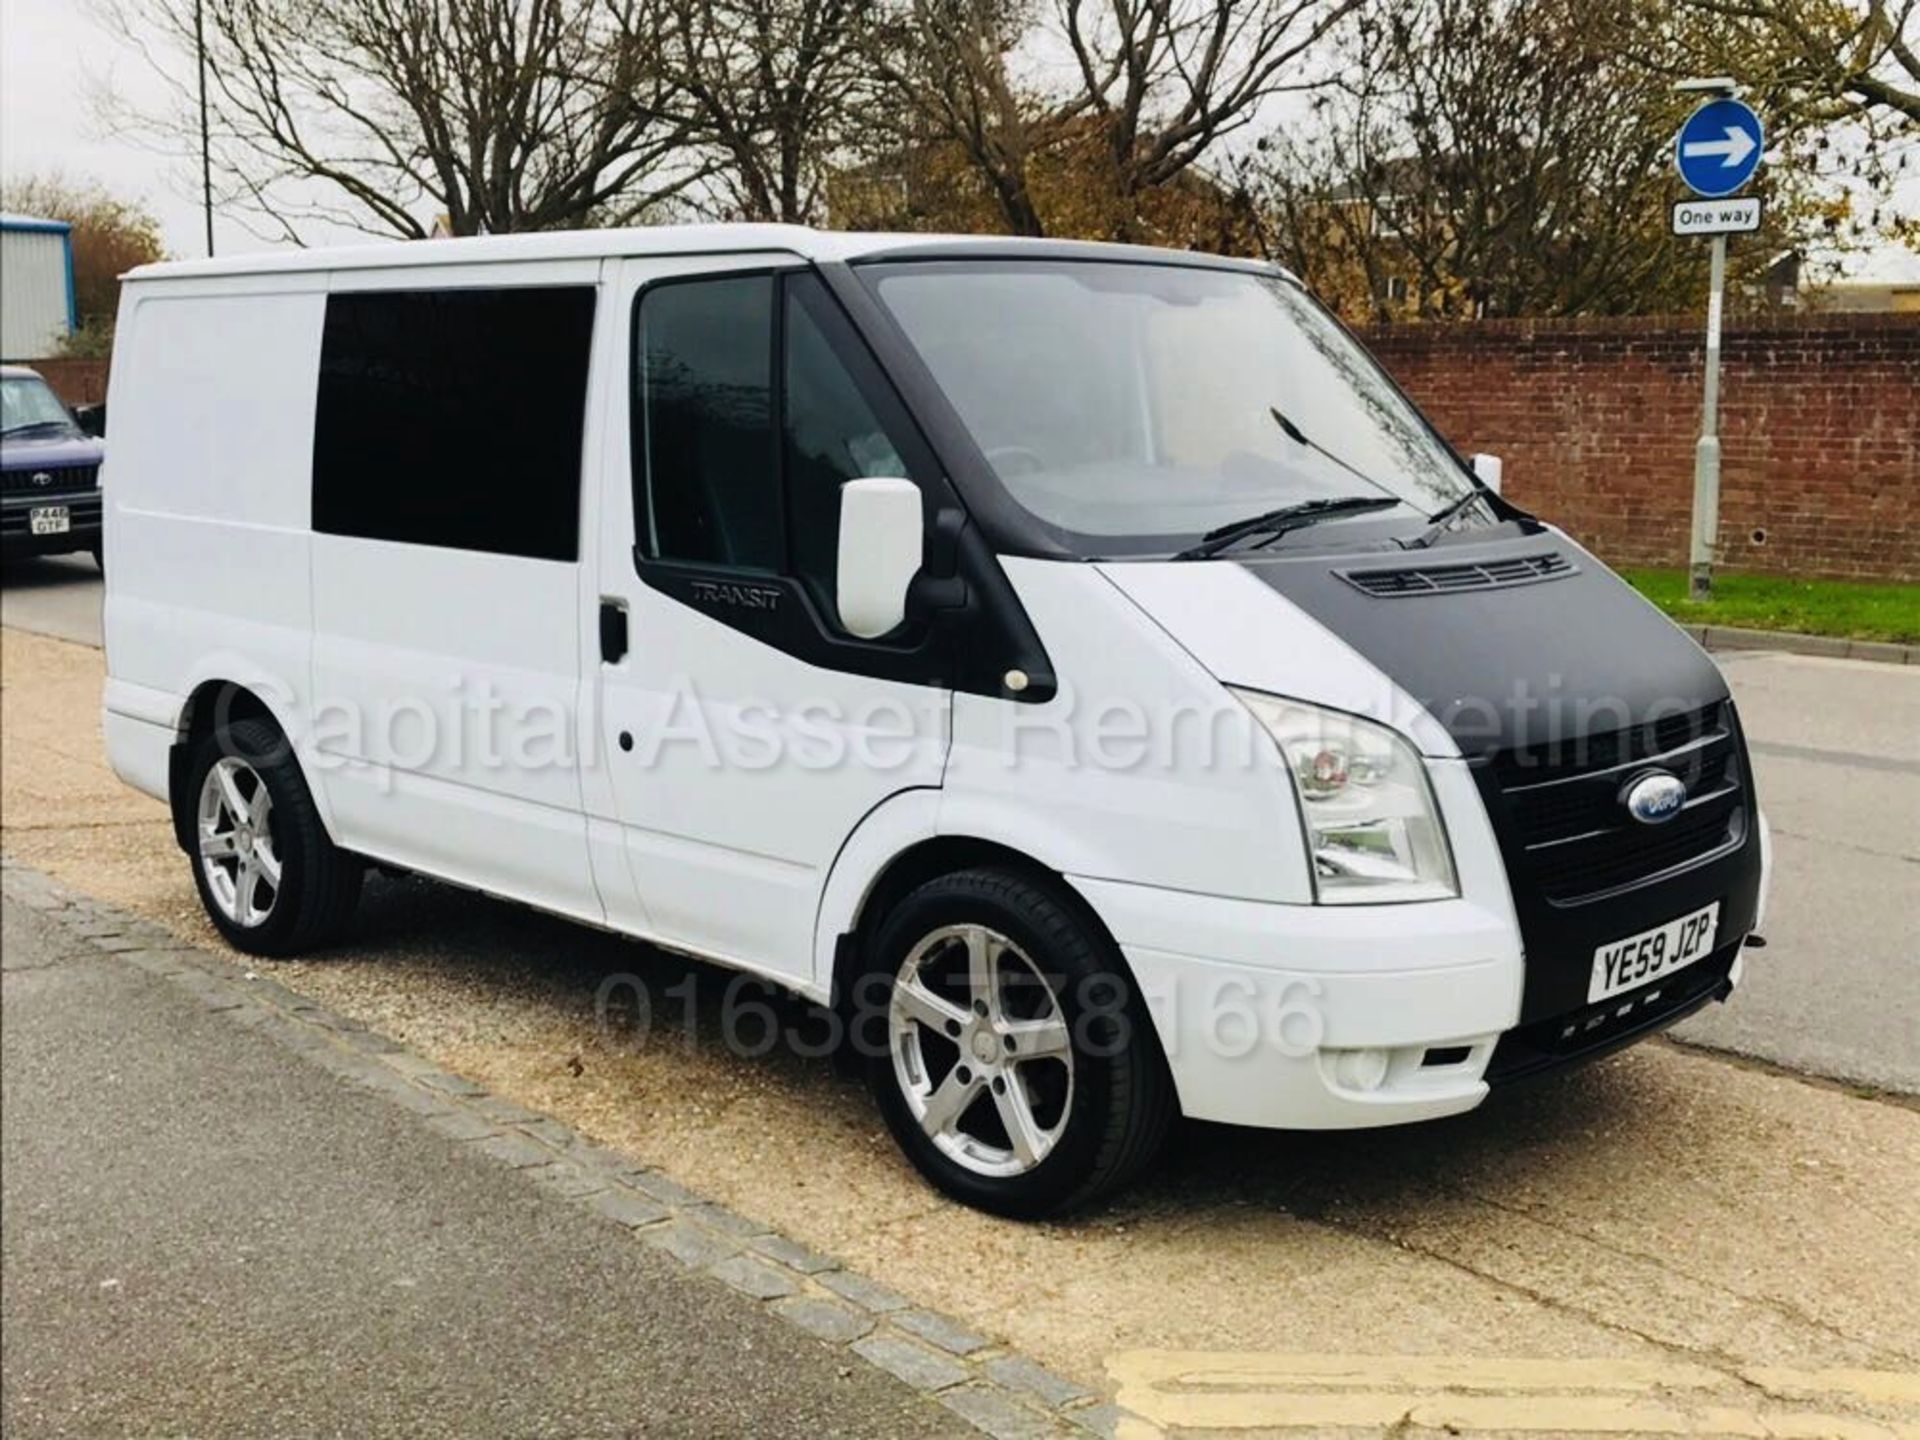 FORD TRANSIT 85 T260 SWB *SPORTY* (2010 MODEL) '2.2 TDCI - 85 PS - 5 SPEED' (NO VAT - SAVE 20%) - Image 7 of 22